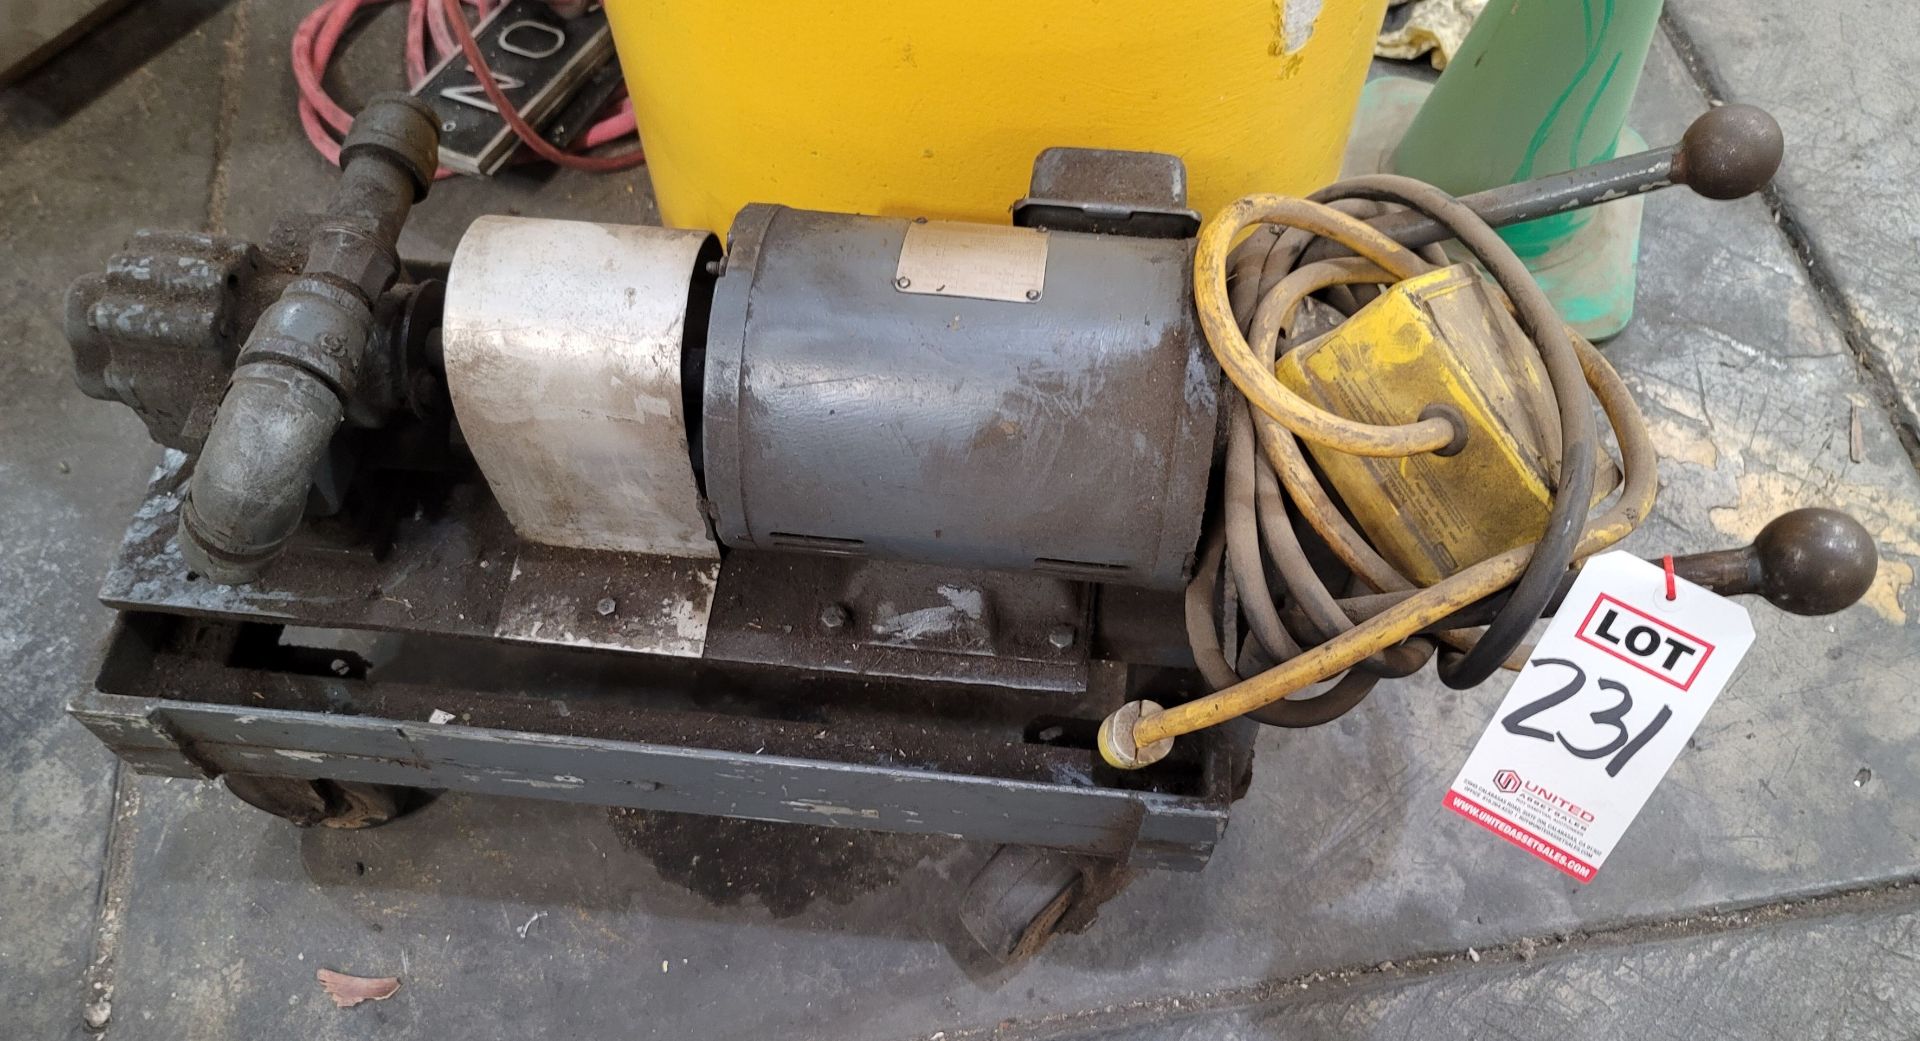 5 HP ROPER PUMP ON CASTERS, DATA TAG UNREADABLE